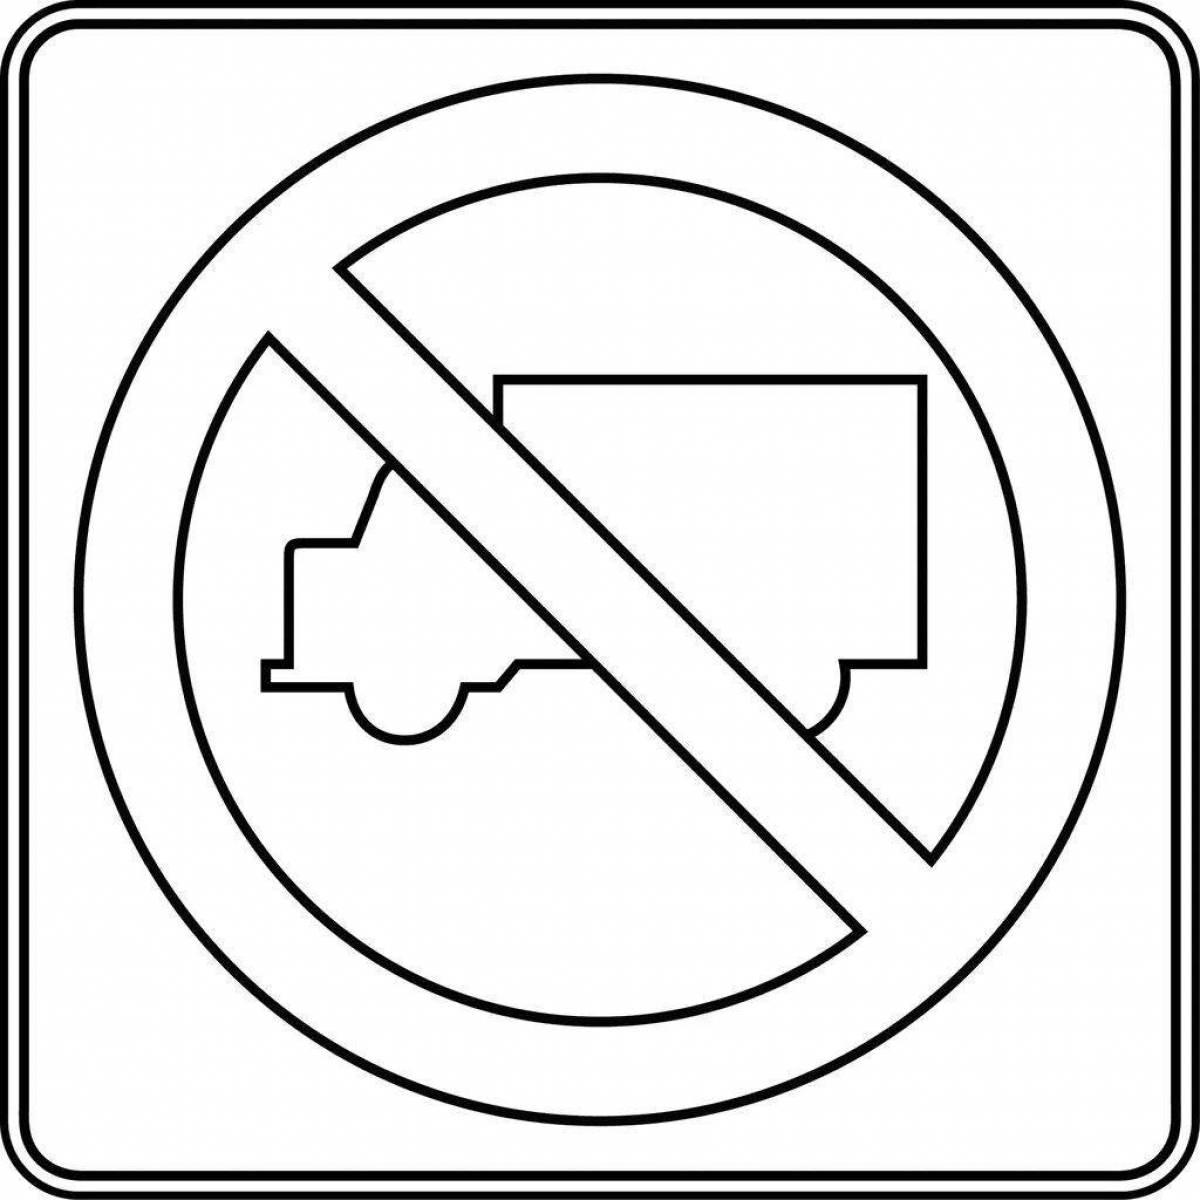 Coloring book grand horn forbidden traffic sign